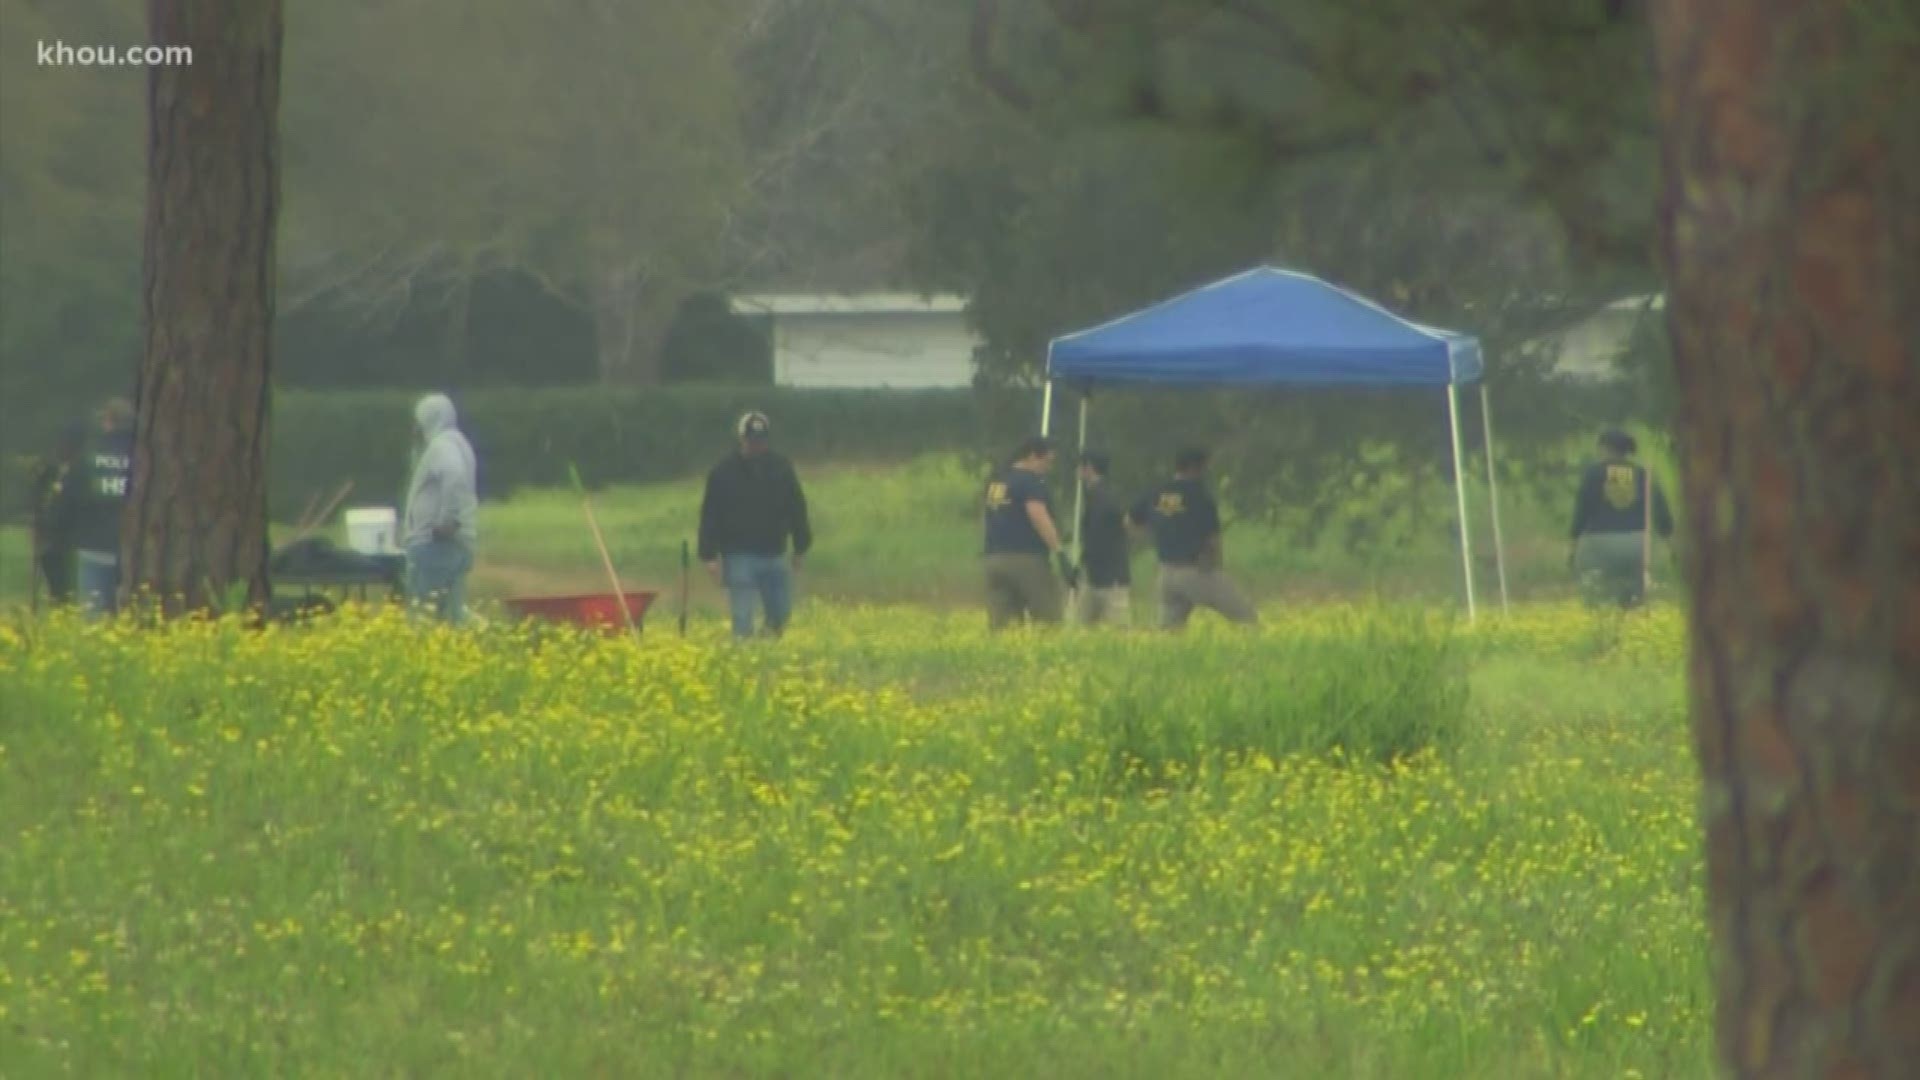 After searching a golf course in Clear Lake, investigators have called off the search after no bodies were found. Police received a tip from a gang member on Wednesday that there may be bodies buried on the course.